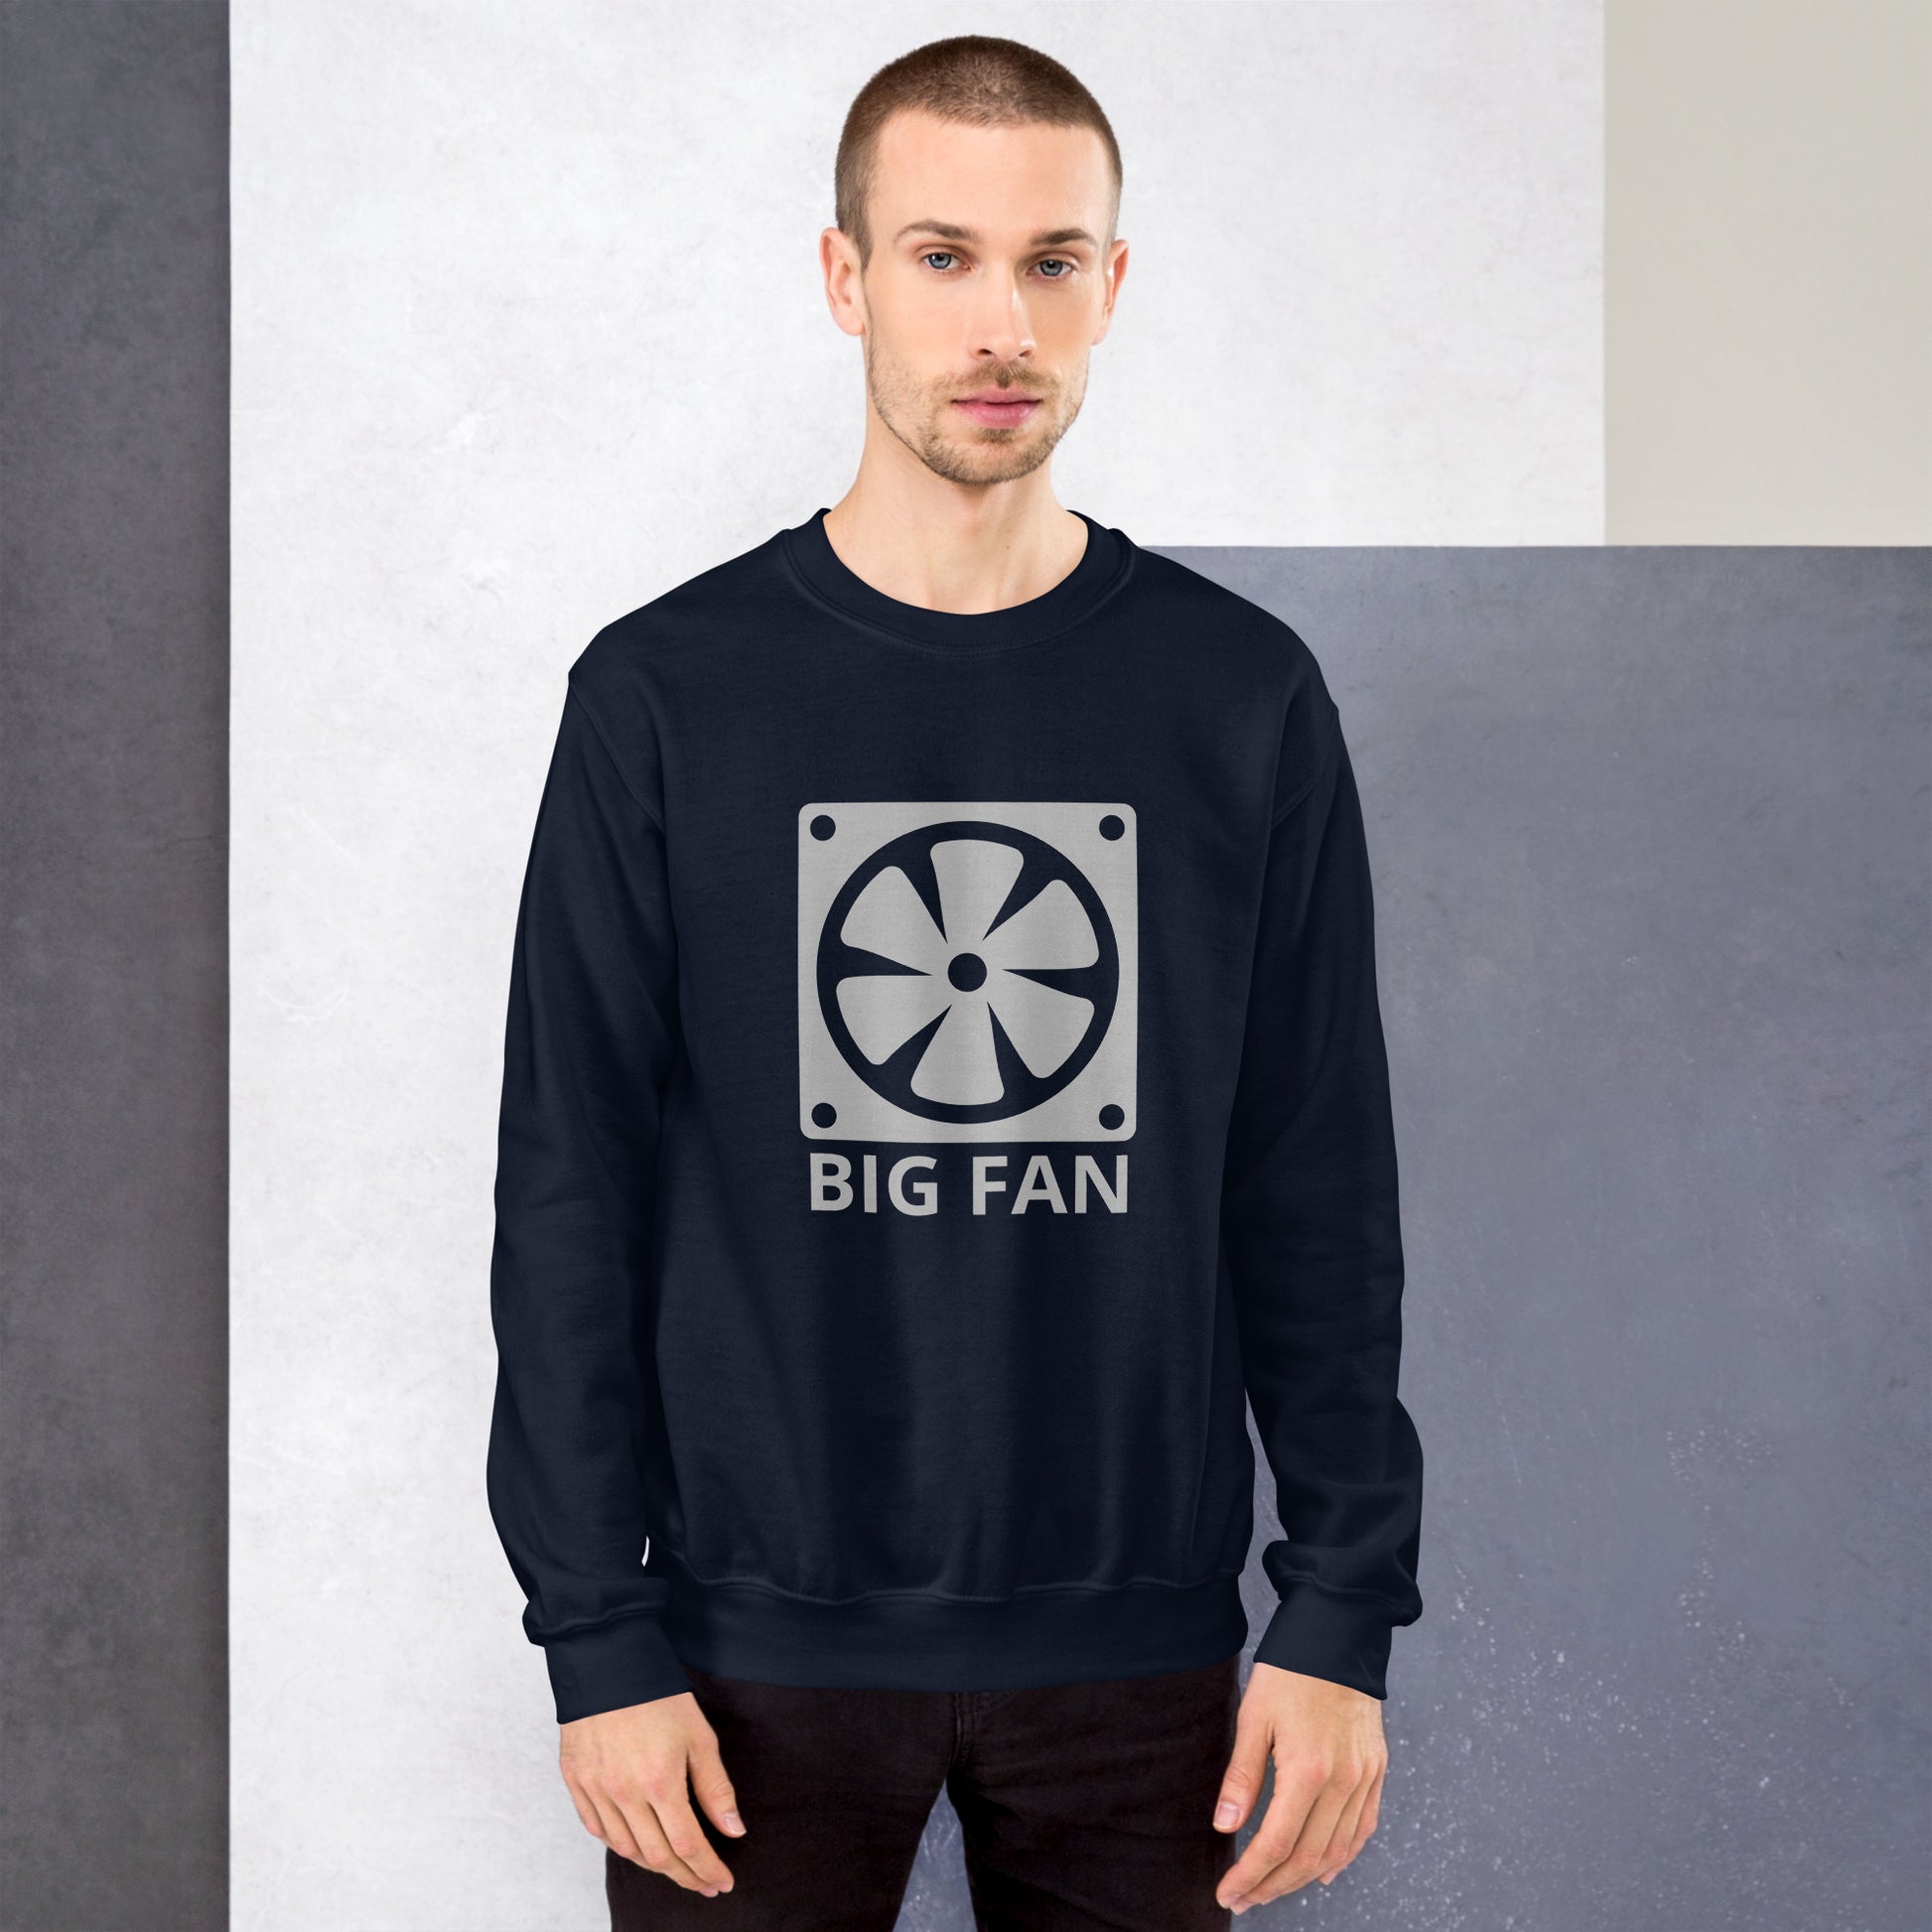 Men with navy blue sweatshirt with image of a big computer fan and the text "BIG FAN"